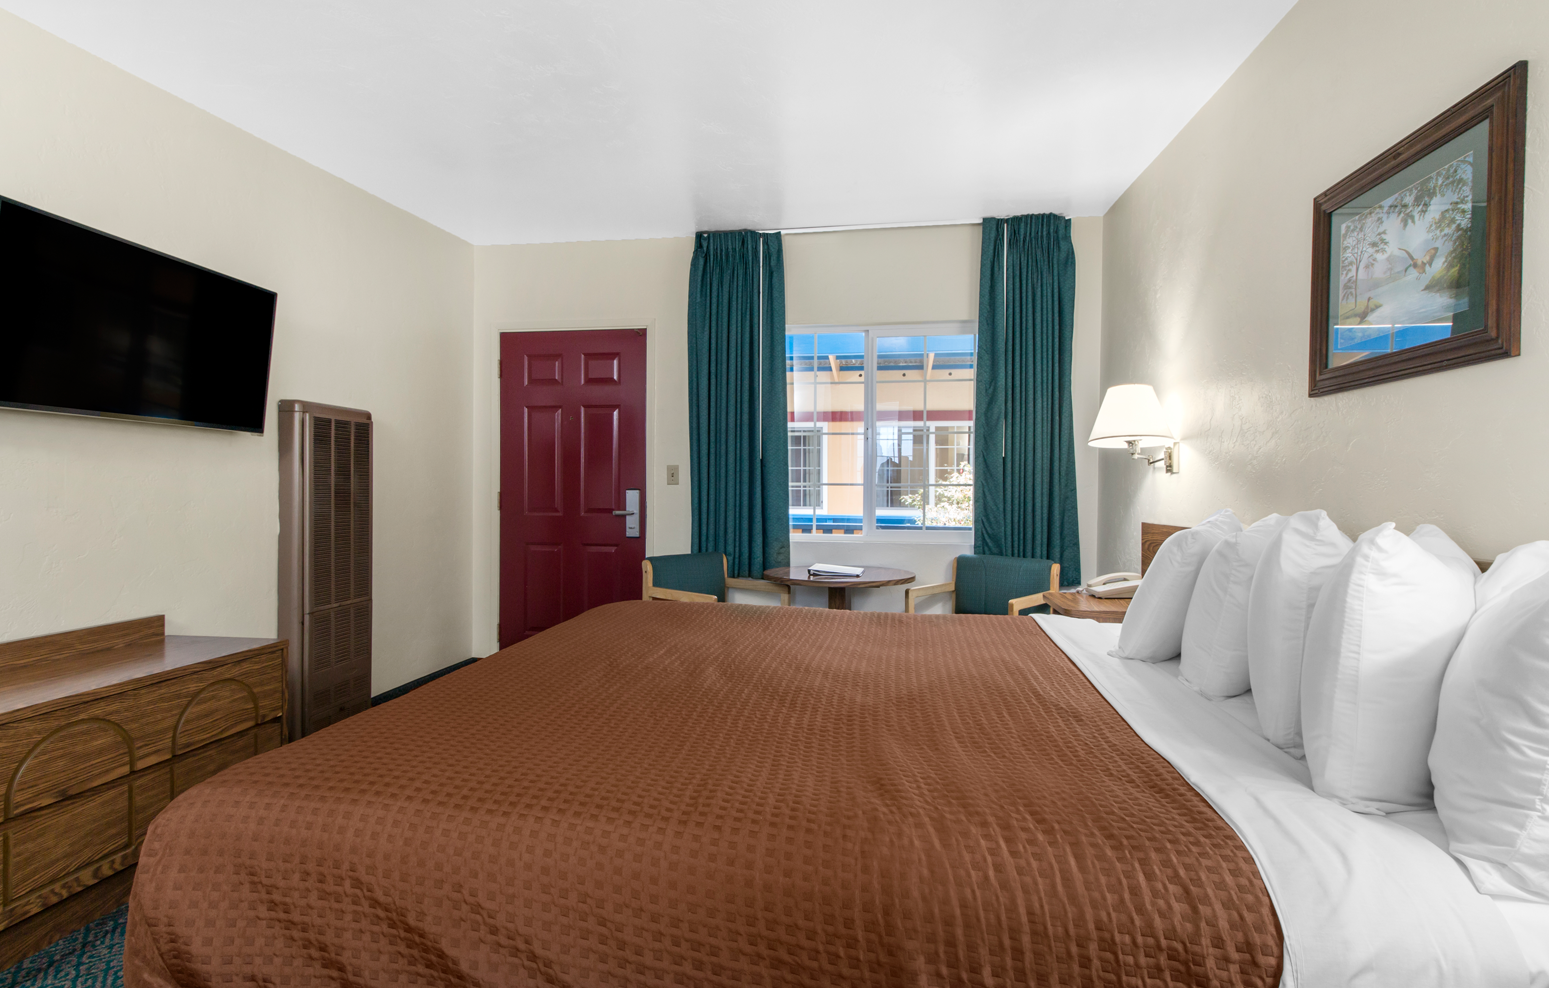 We offer everything you need for
								a comfortable stay.